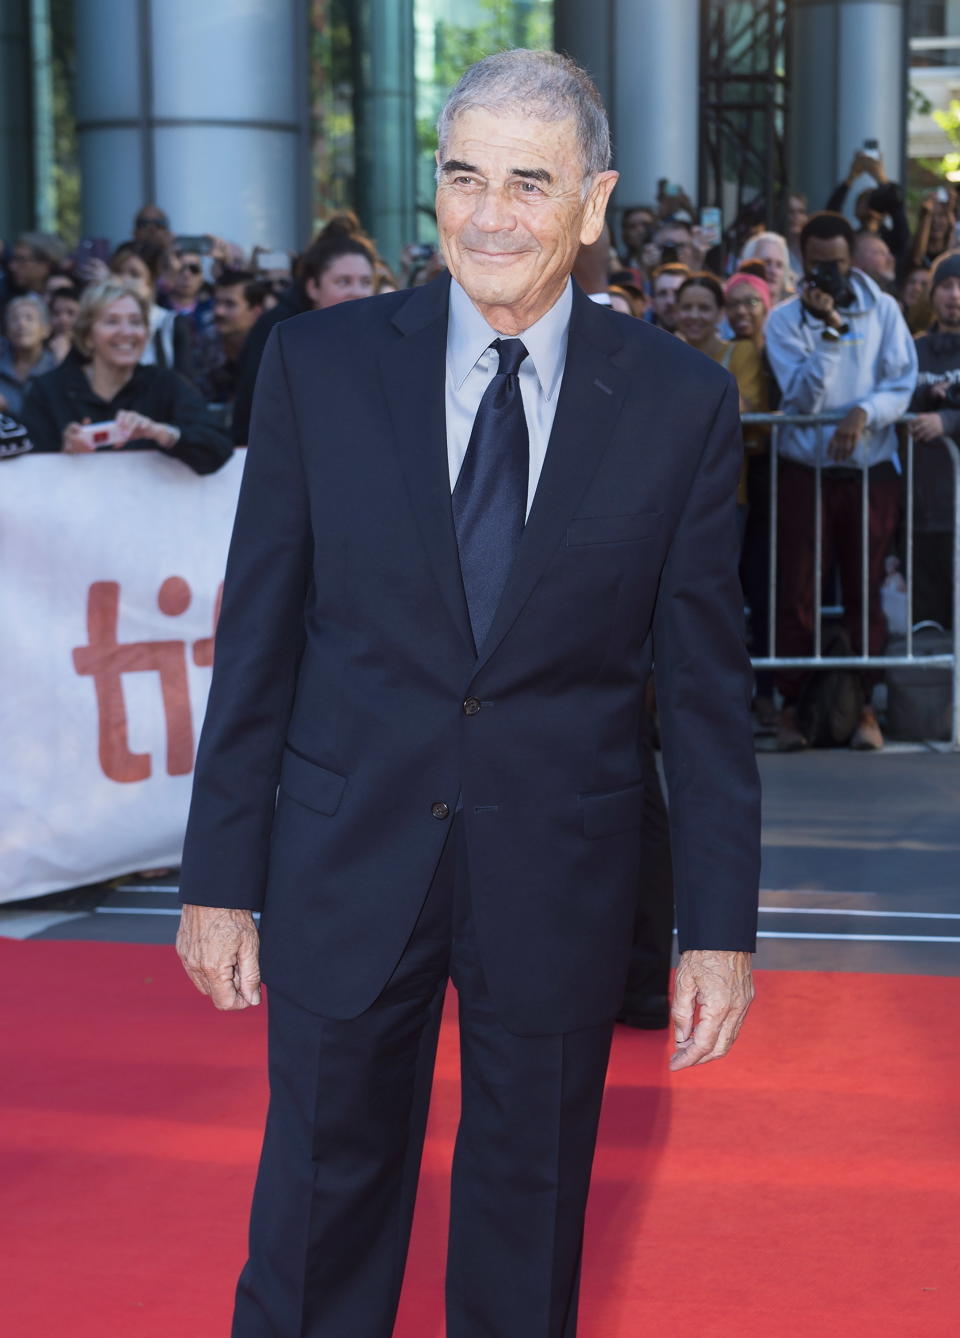 FILE - In this Sept. 12, 2018 file photo, actor Robert Forster poses for photographs on the red carpet for the new movie "What They Had" during the 2018 Toronto International Film Festival in Toronto. Forster, the handsome character actor who got a career resurgence and Oscar-nomination for playing bail bondsman Max Cherry in "Jackie Brown," has died at age 78. Forster's agent Julia Buchwald says he died Friday, Oct. 11, 2019, at home in Los Angeles of brain cancer. (Nathan Denette/The Canadian Press via AP, File)